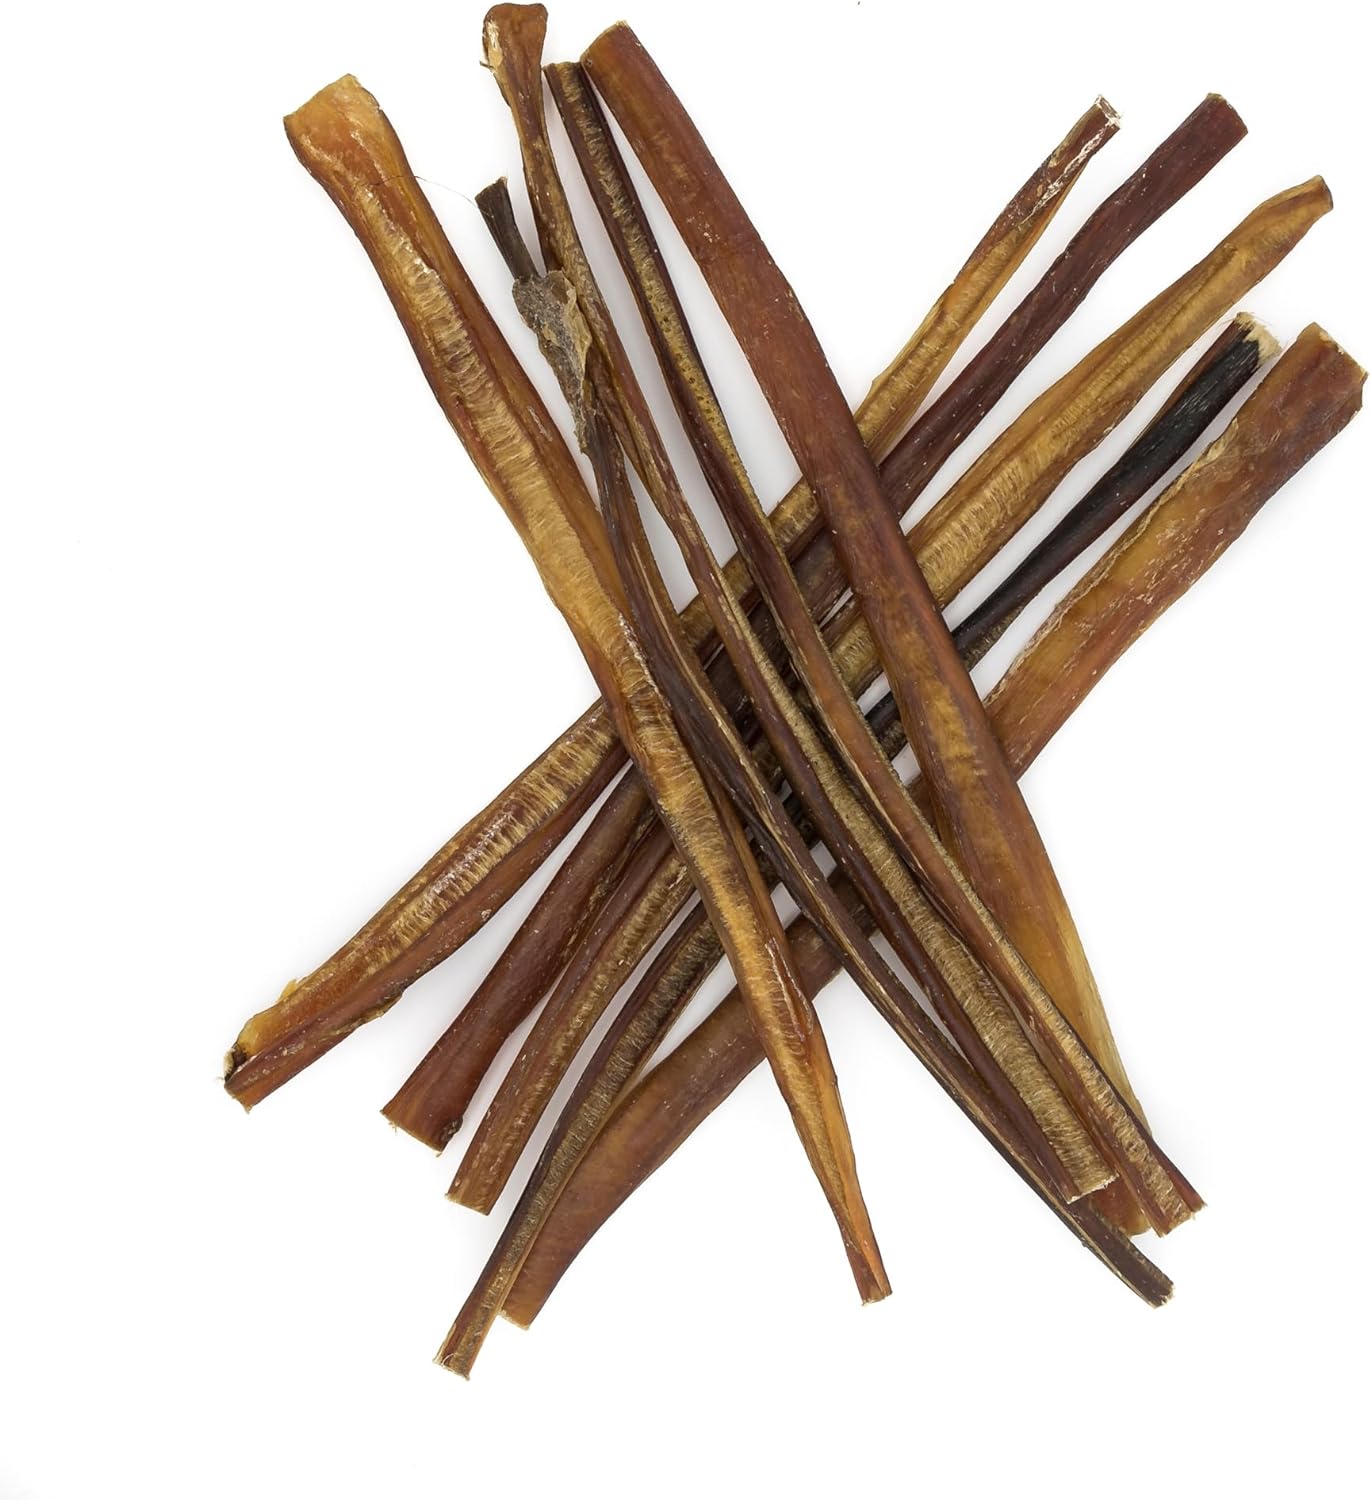 Best Bully Sticks 12 Inch All-Natural Thin Bully Sticks for Dogs - 12” Fully Digestible, 100% Grass-Fed Beef, Grain and Rawhide Free | 24 Pack : Pet Supplies